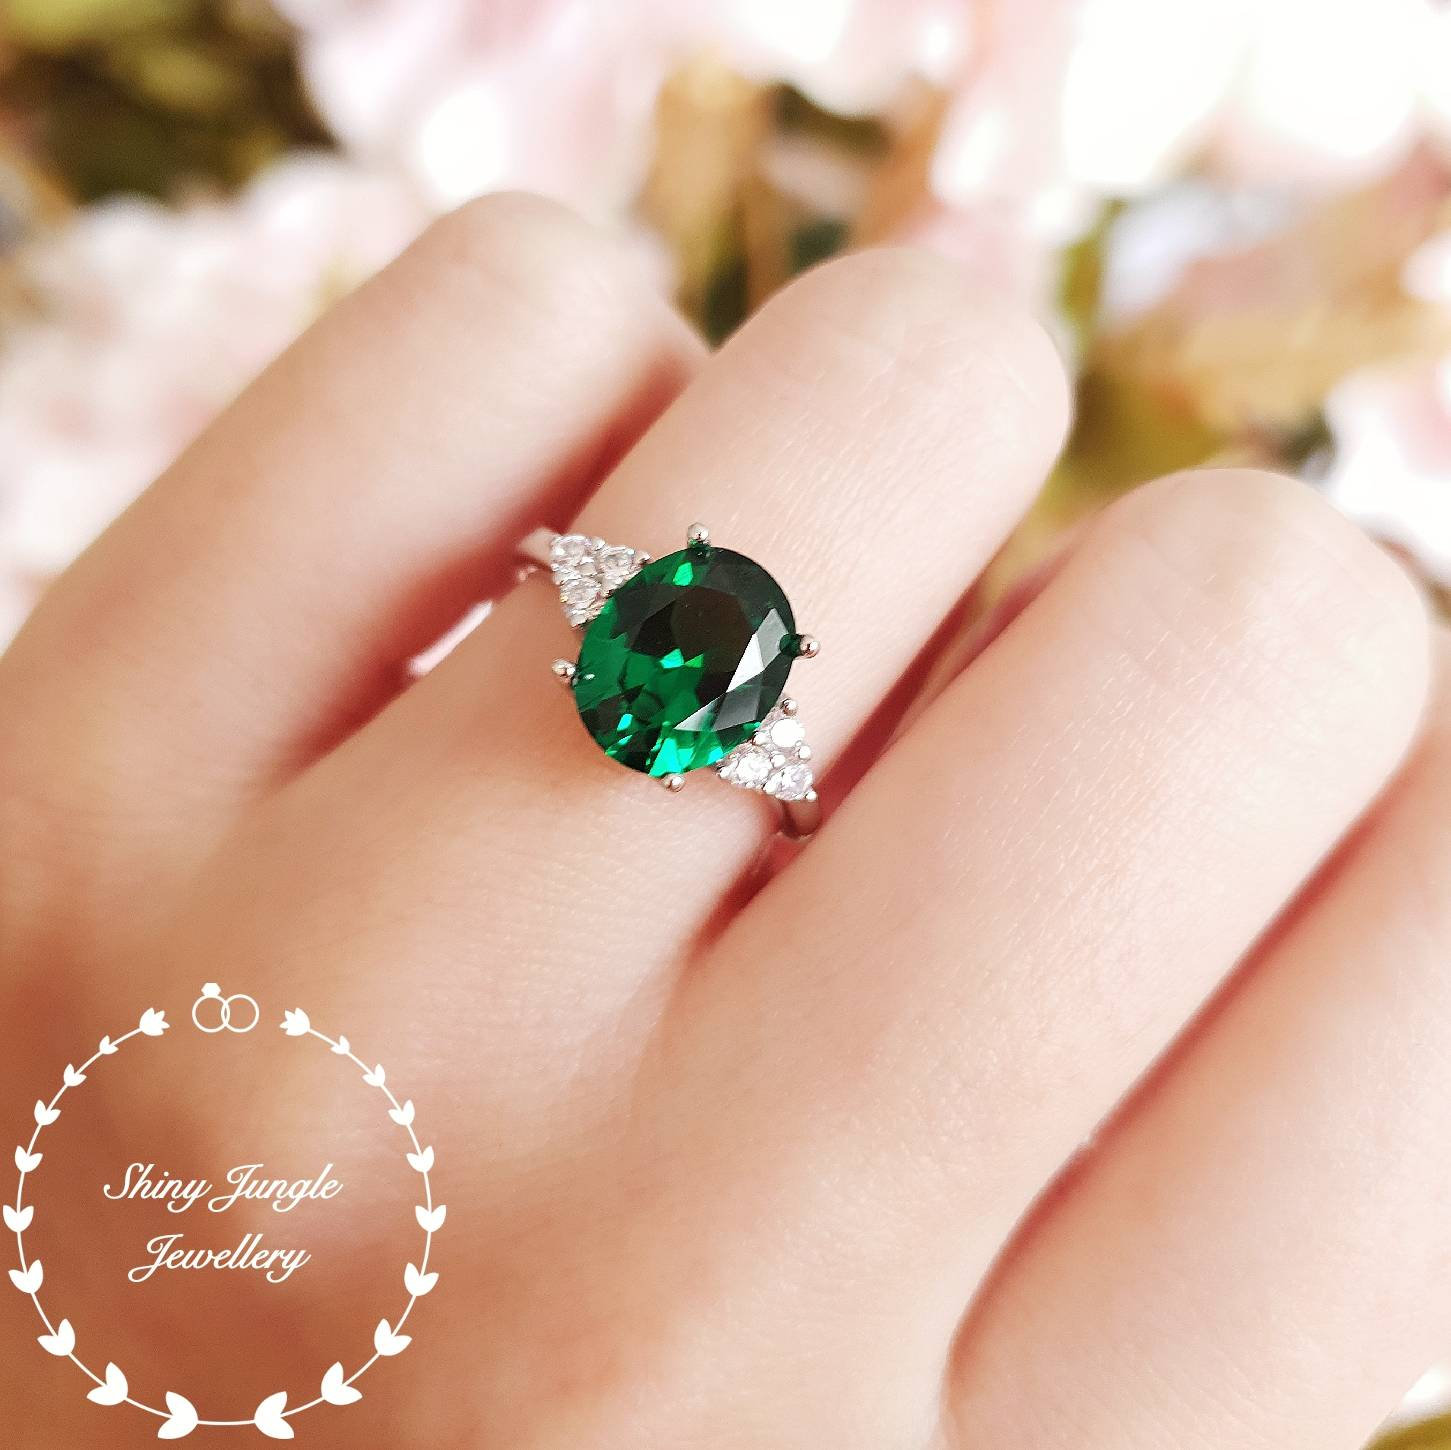 Handmade Ring Beautiful Ring For Beautiful Buyer Three Stone Ring Gift Item Natural Emerald & Ruby Gemstone 925 Sterling Silver Ring